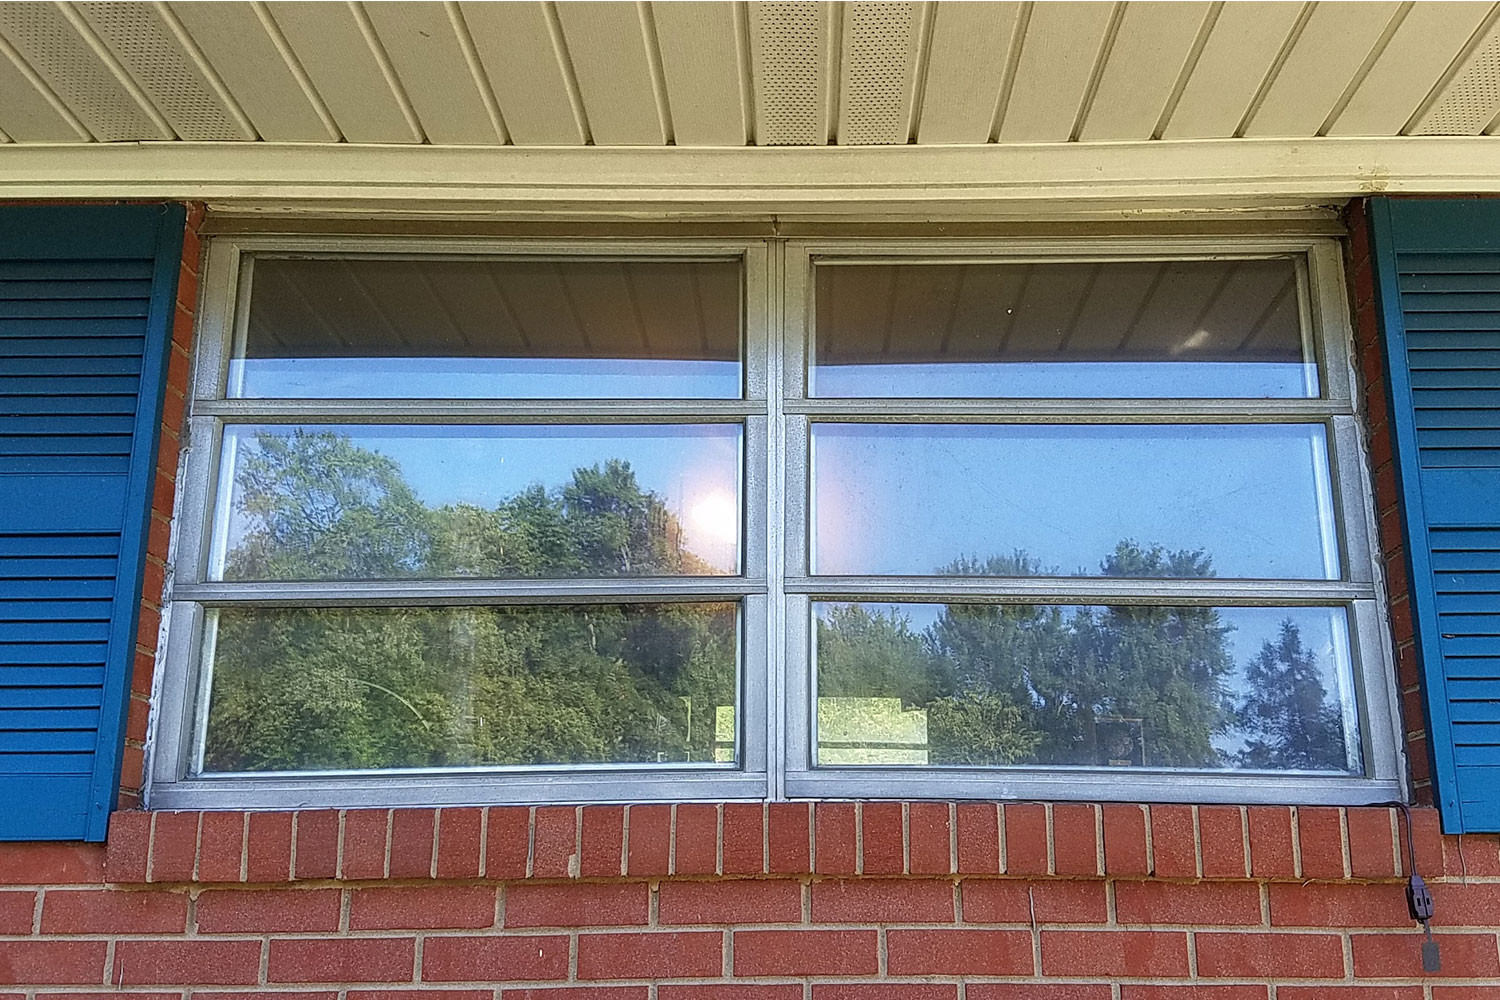 A window of a house from the outside with the reflection of trees